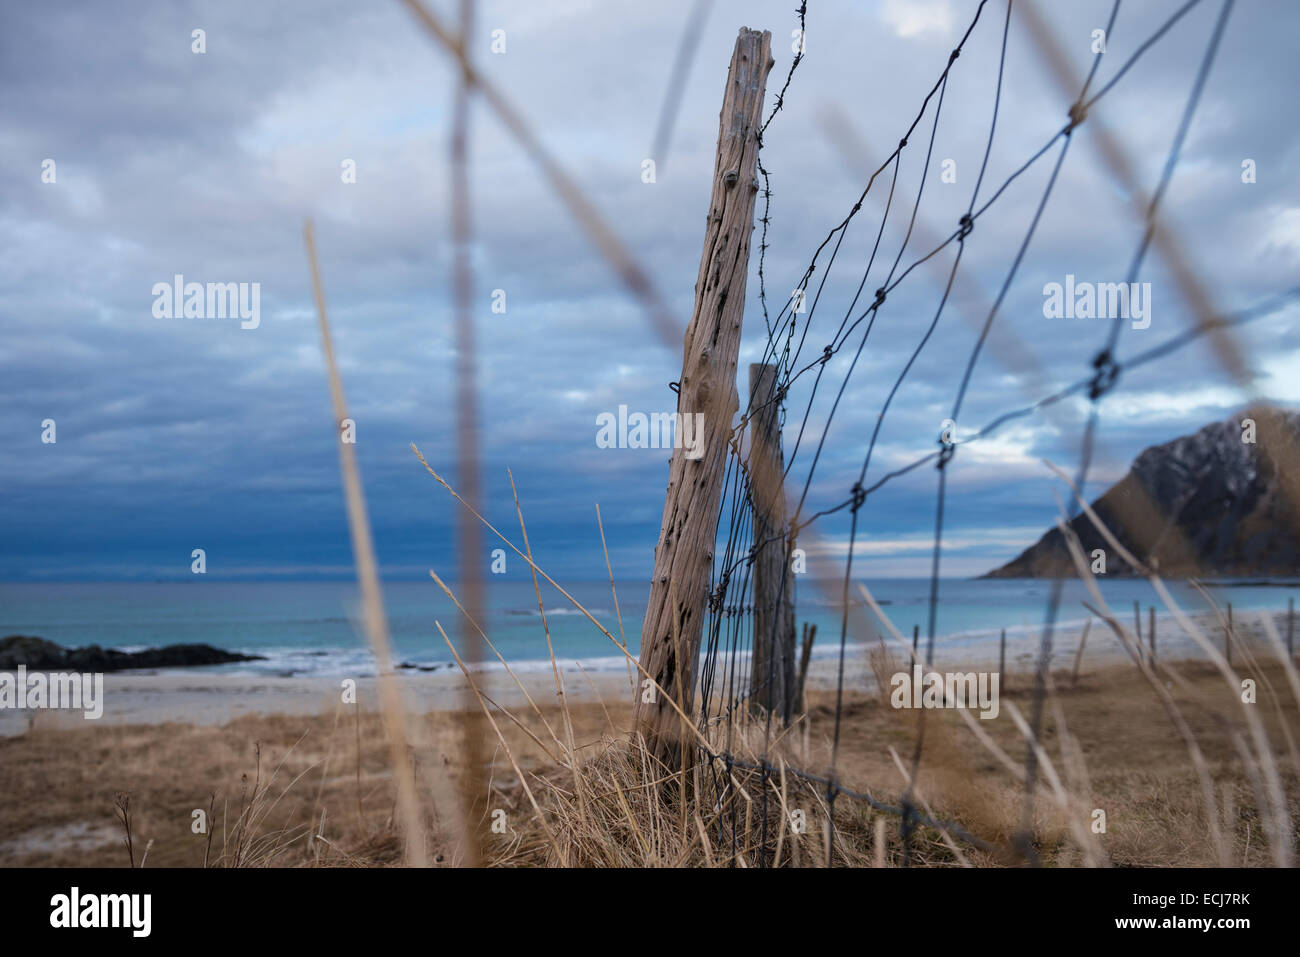 Old fence and dry grass with Skagsanden beach in background, Flakstadøy, Lofoten Islands, Norway Stock Photo